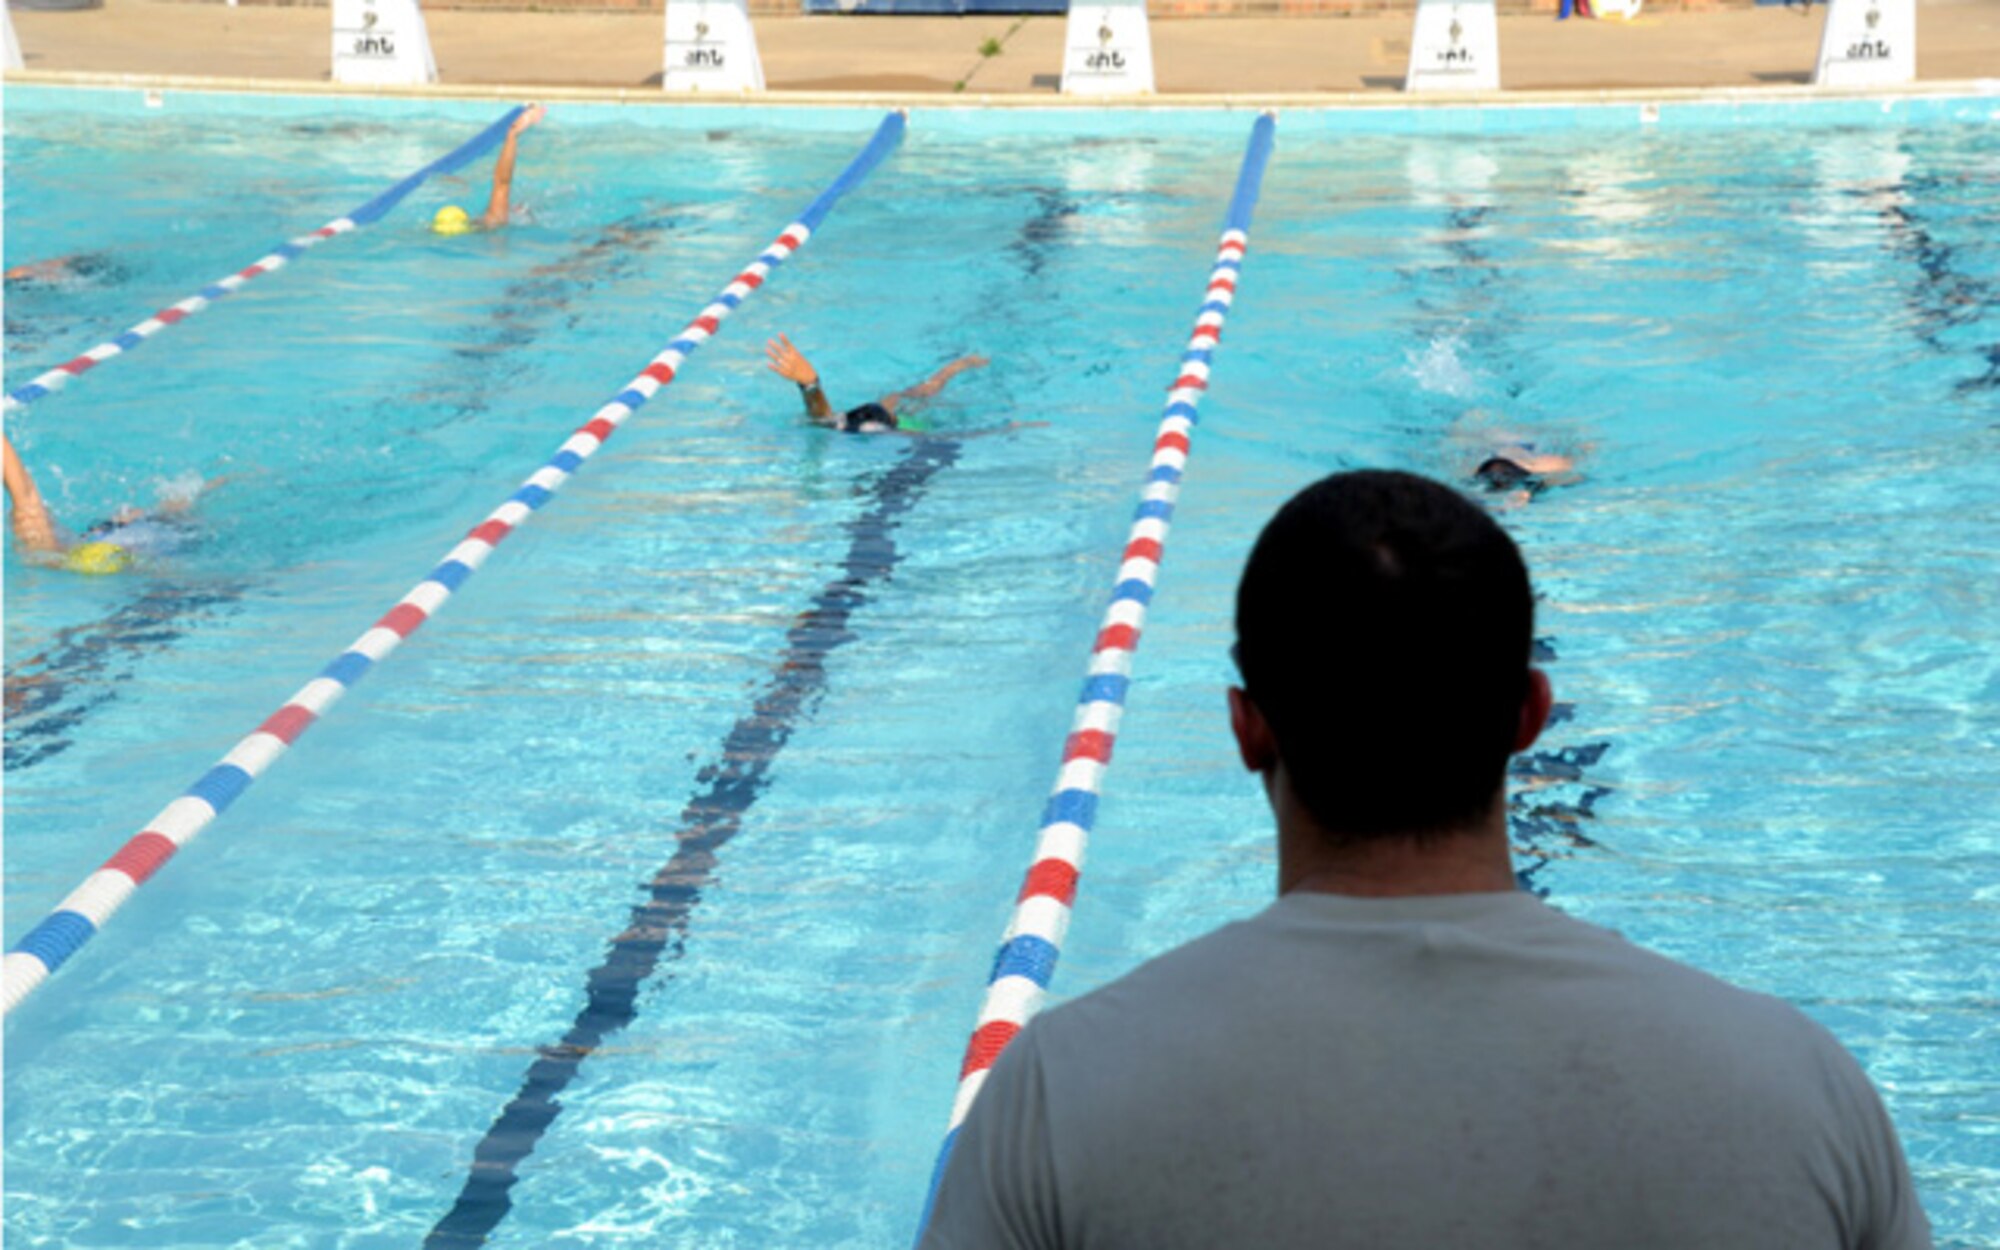 Airman 1st Class Lance Thornton watches his team swim laps at practice Aug. 30. After six months of volunteering with the Montgomery YMCA Barracudas, Thornton became the head coach for the entire program. In this role, Thornton leads the instruction of all of 130 six to 18 year-old swimmers.